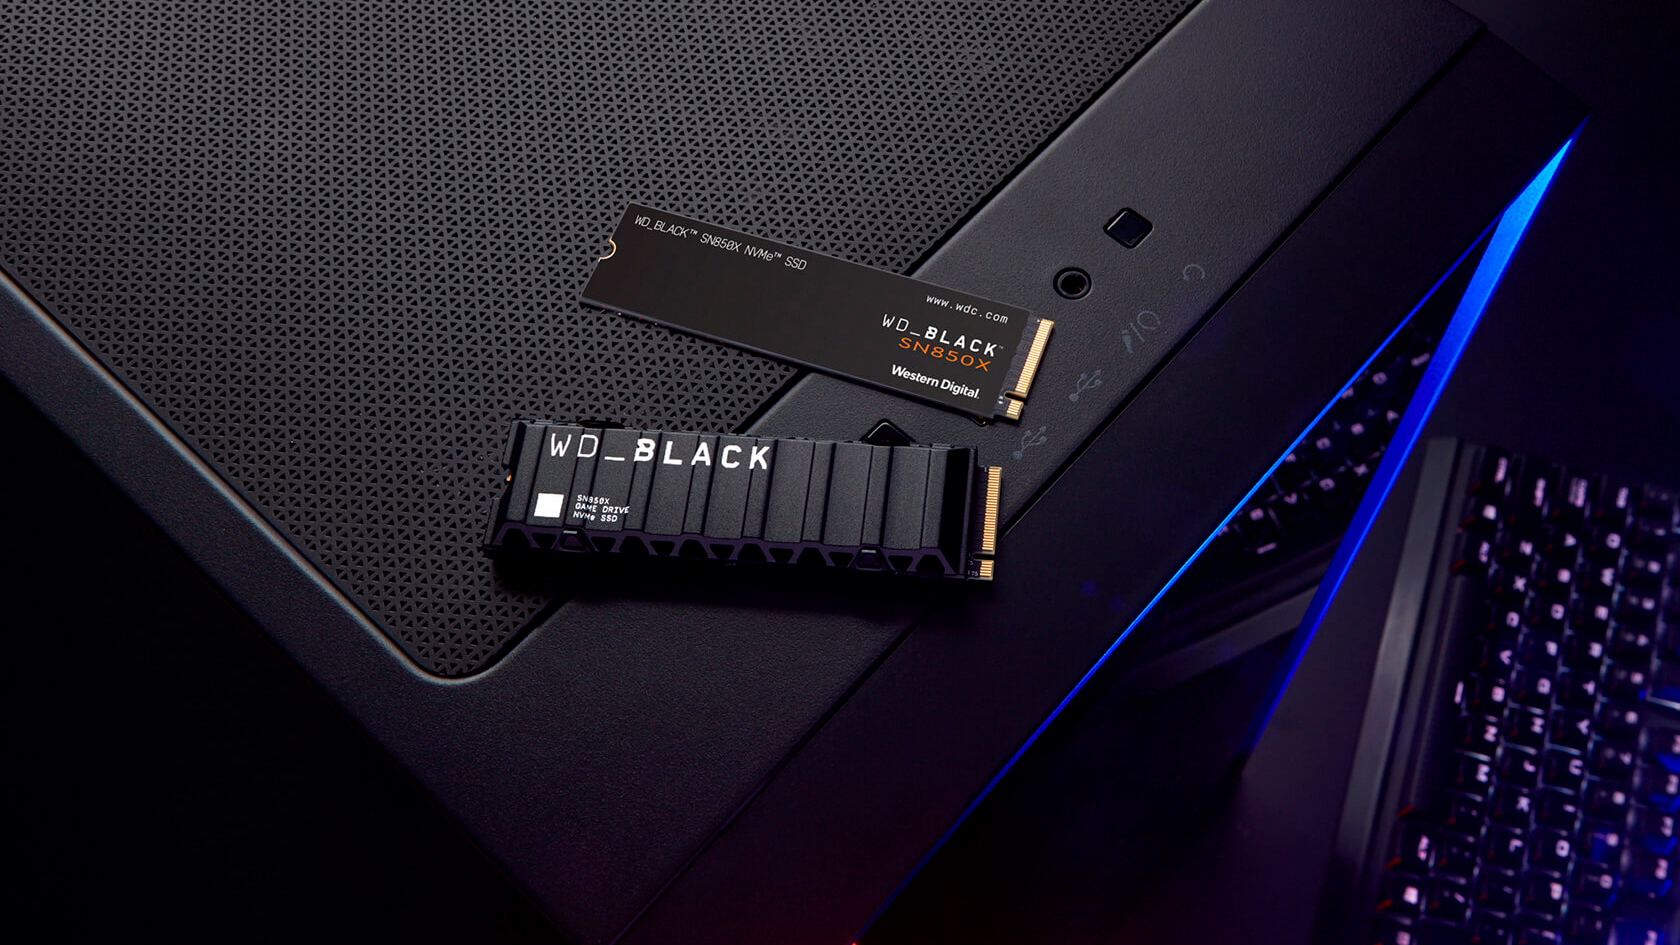 PS5 SSD Storage Expansion Hands-On: WD_BLACK SN850 NVMe 1TB SSD With  Heatsink